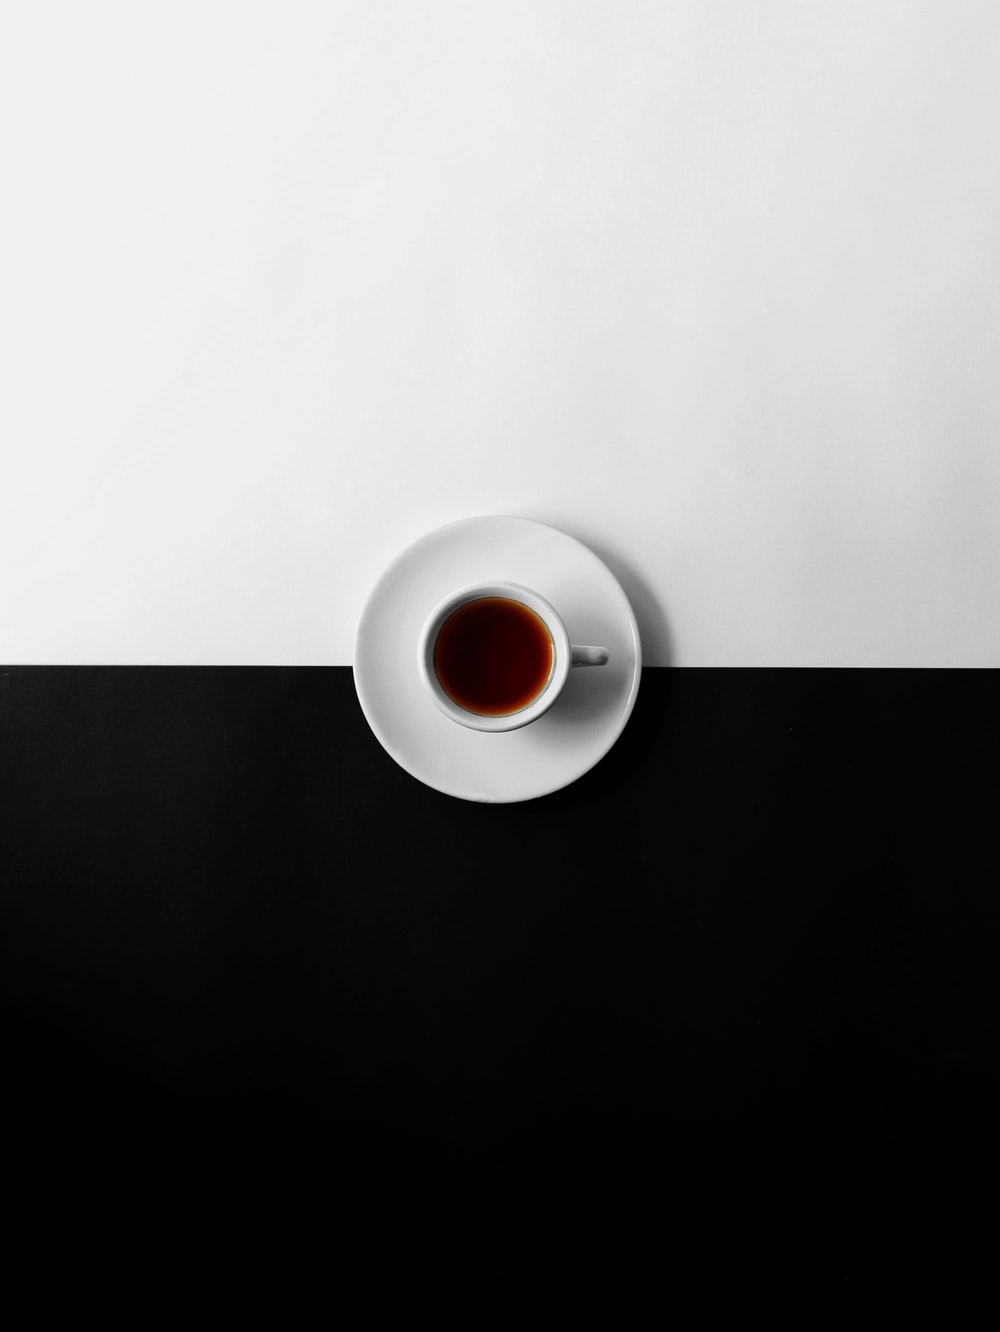 Coffee Minimalist Picture. Download Free Image